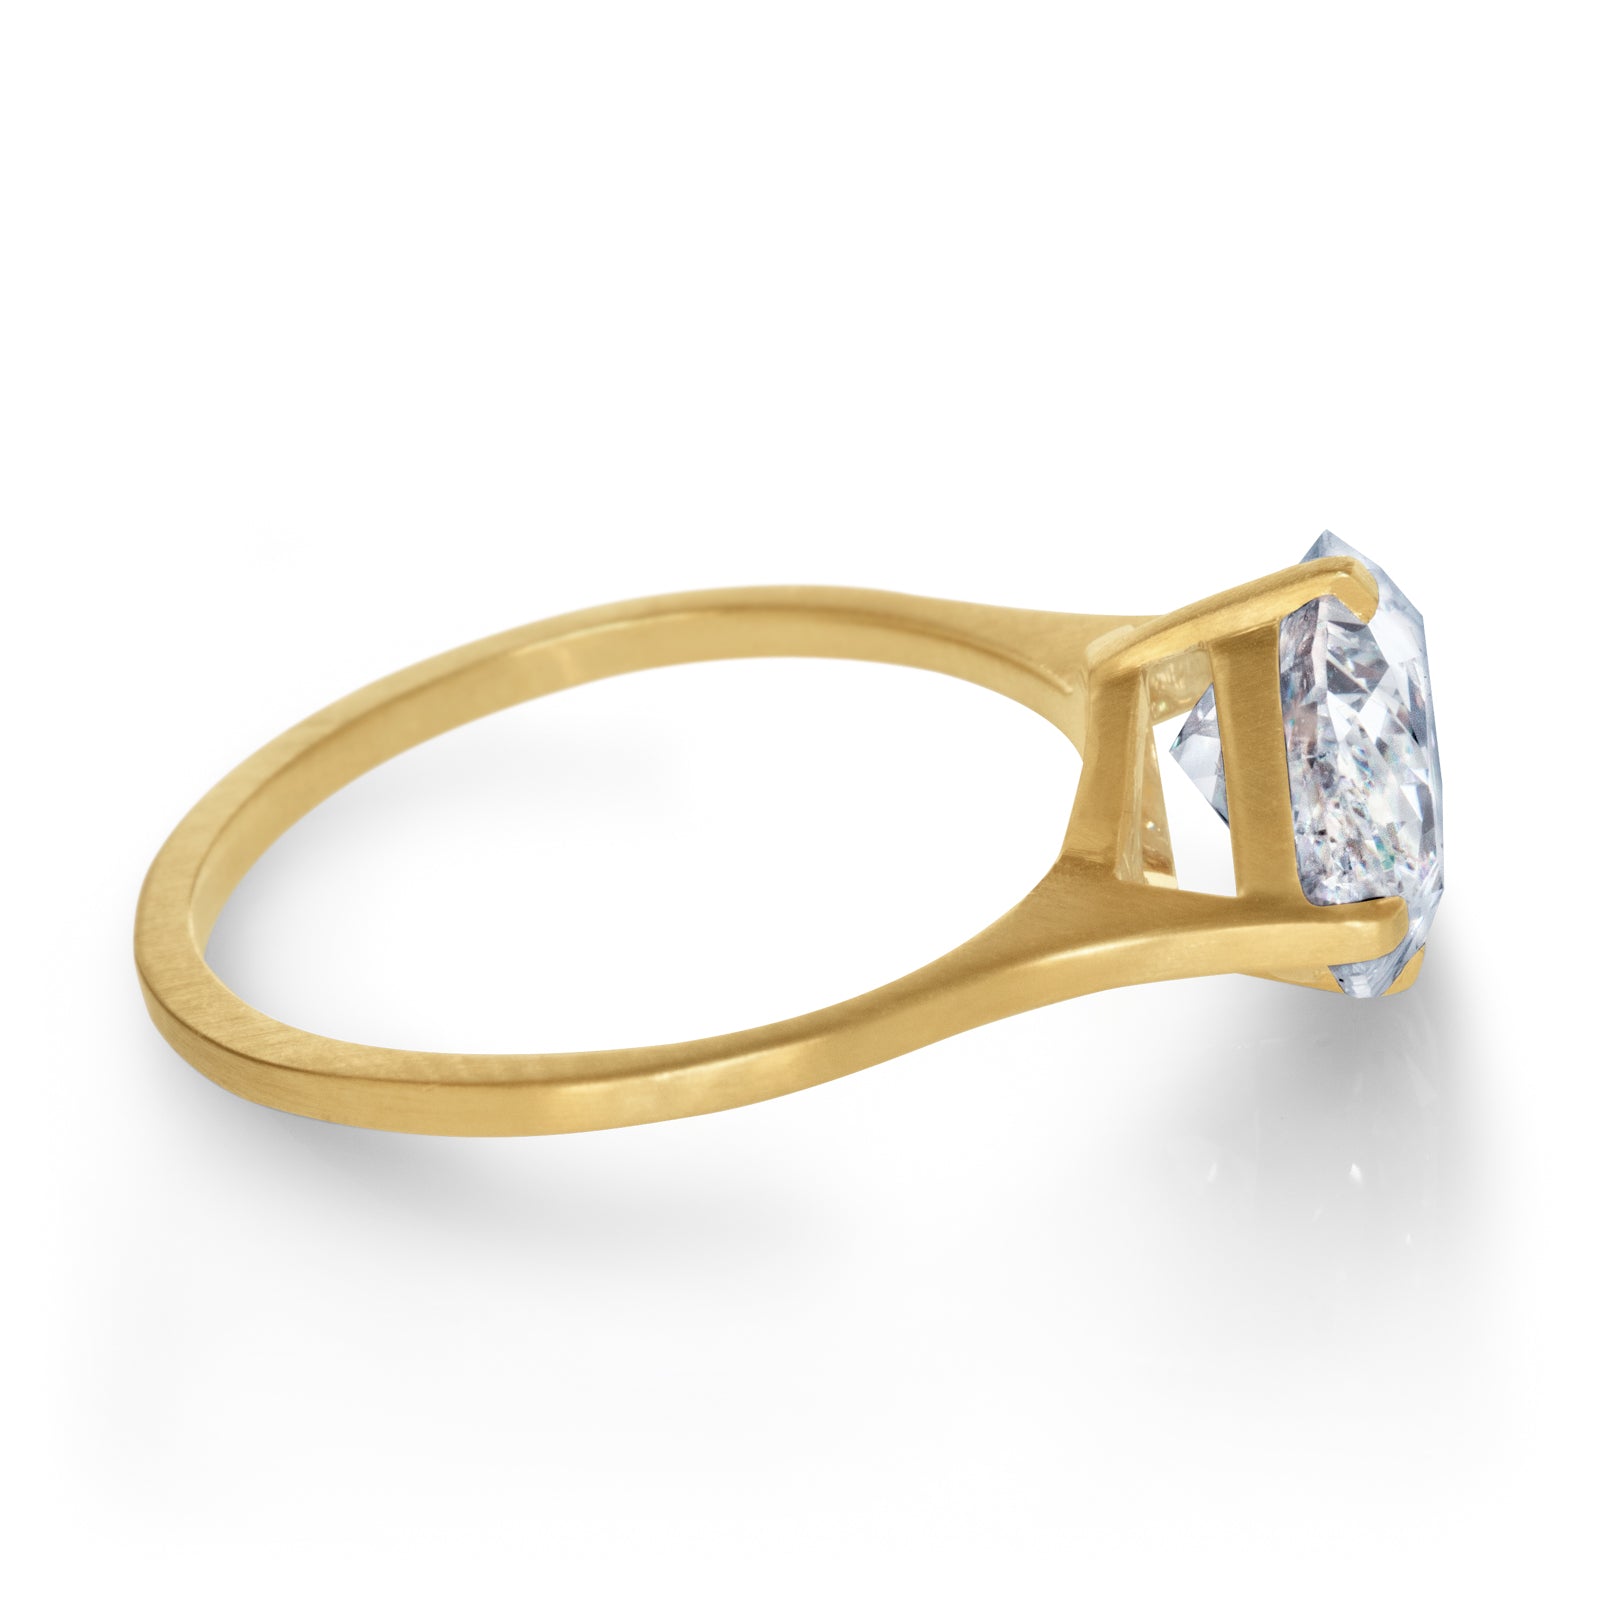 3.03CT PEAR-SHAPED DIAMOND ENGAGEMENT RING